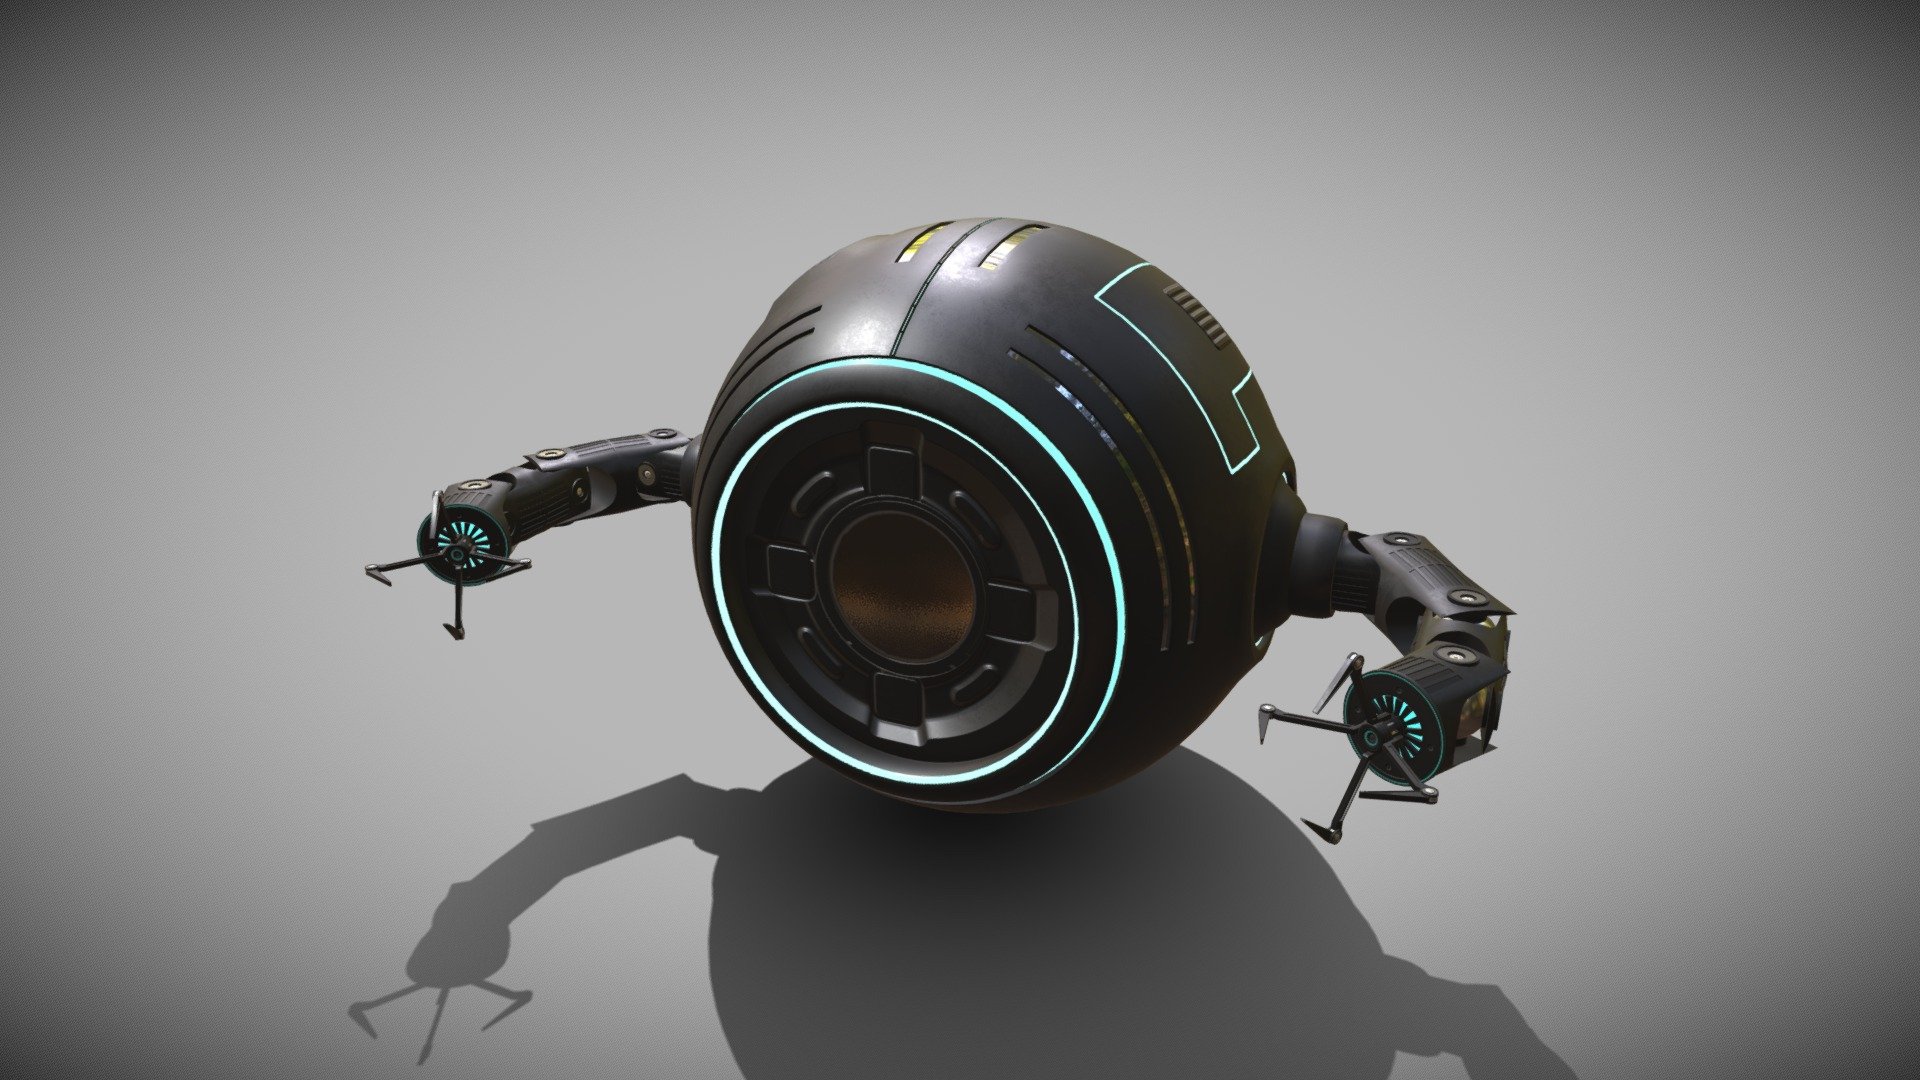 Sci-Fi Repair Drone

Don't ask me how it works&hellip;it just does :D

Hand-painted using Substance Painter. PBR - AR/ VR - Low-Poly

Google, YouTube, Unity and Unreal Engine Friendly

Game-ready

Textures; 2048 x 2048, OpenGL, Dilation + Single Background Colour, 16 Pixel Padding

Maps Include; Base, Normal, Height, Rough, and Metal.

Arms and body are separate objects*

https://stgbooks.blogspot.com/ - Sci-Fi Repair Drone - Buy Royalty Free 3D model by Simon T Griffiths (@RubberMan) 3d model